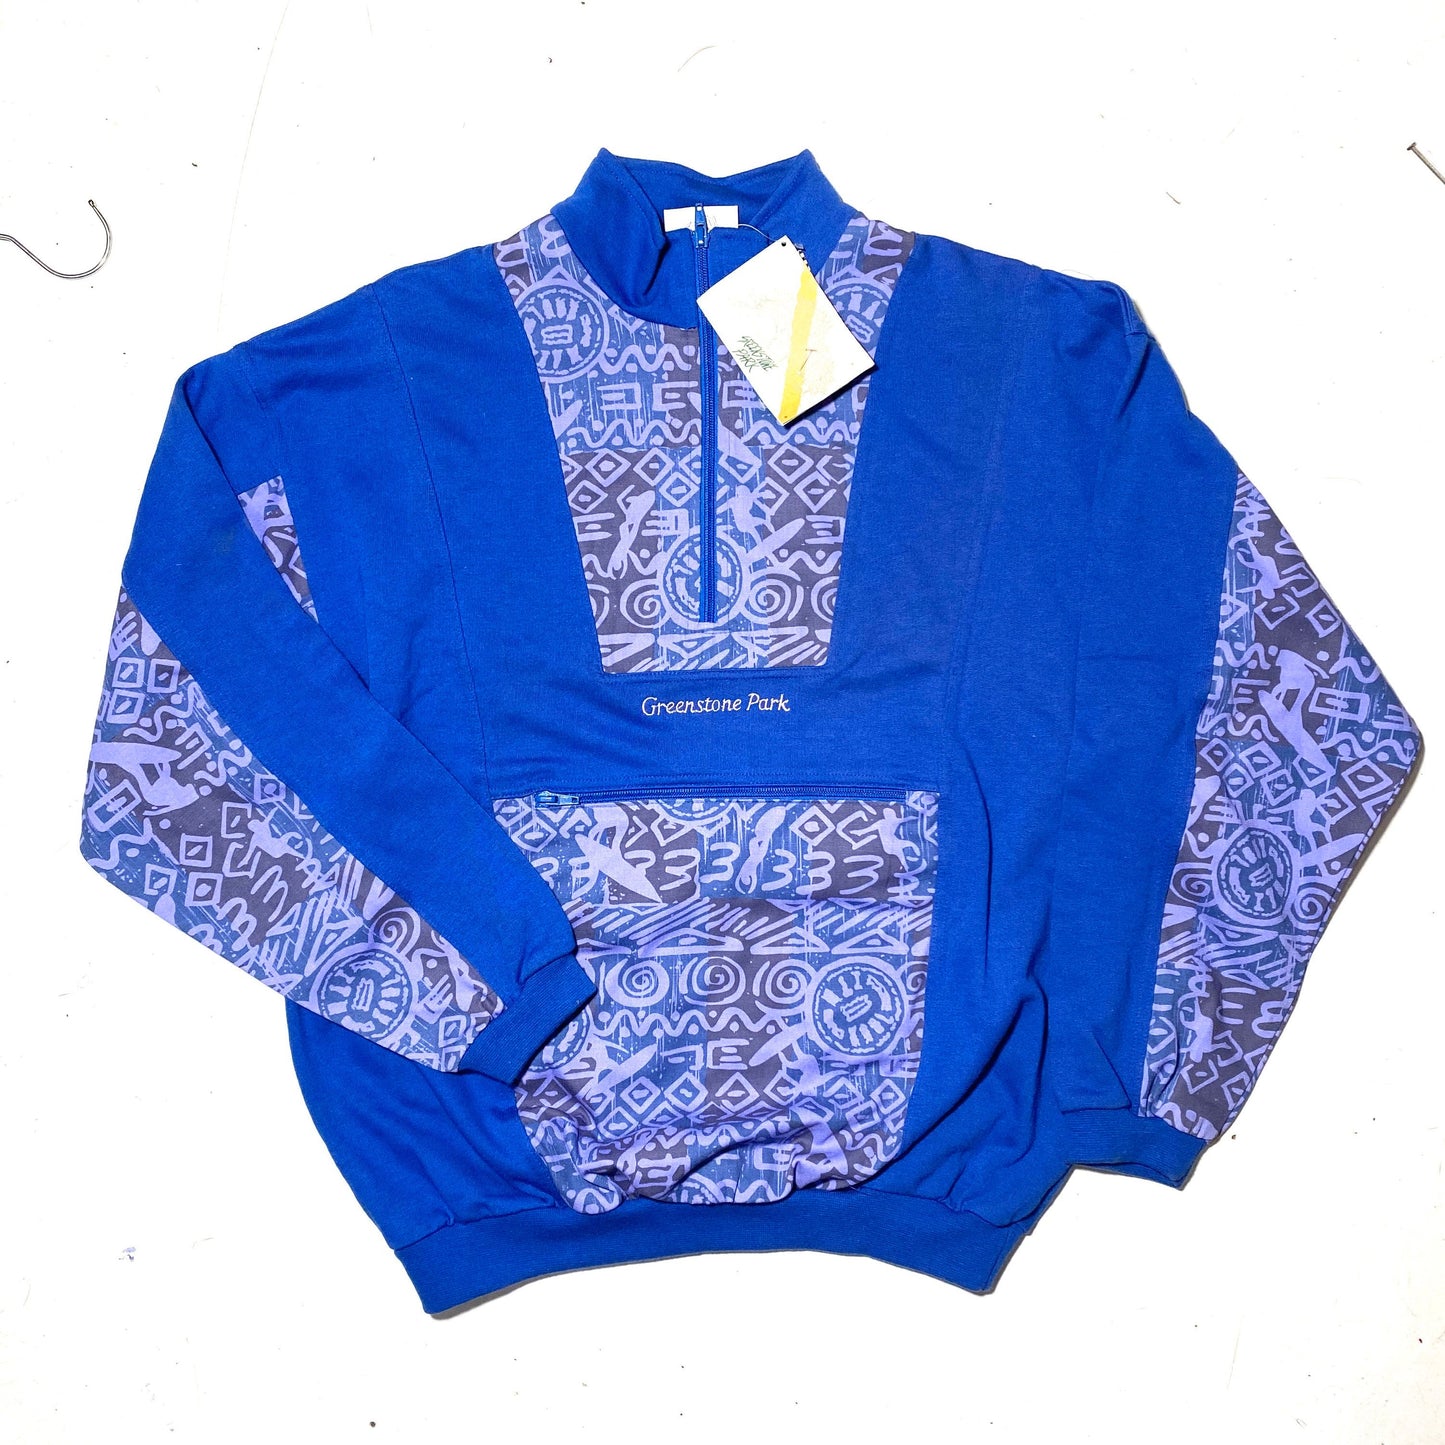 90s graffiti hip blue sweatshirt made in Italy by GreenStone, cool abstract inserts with surfer profiles, new w/tags